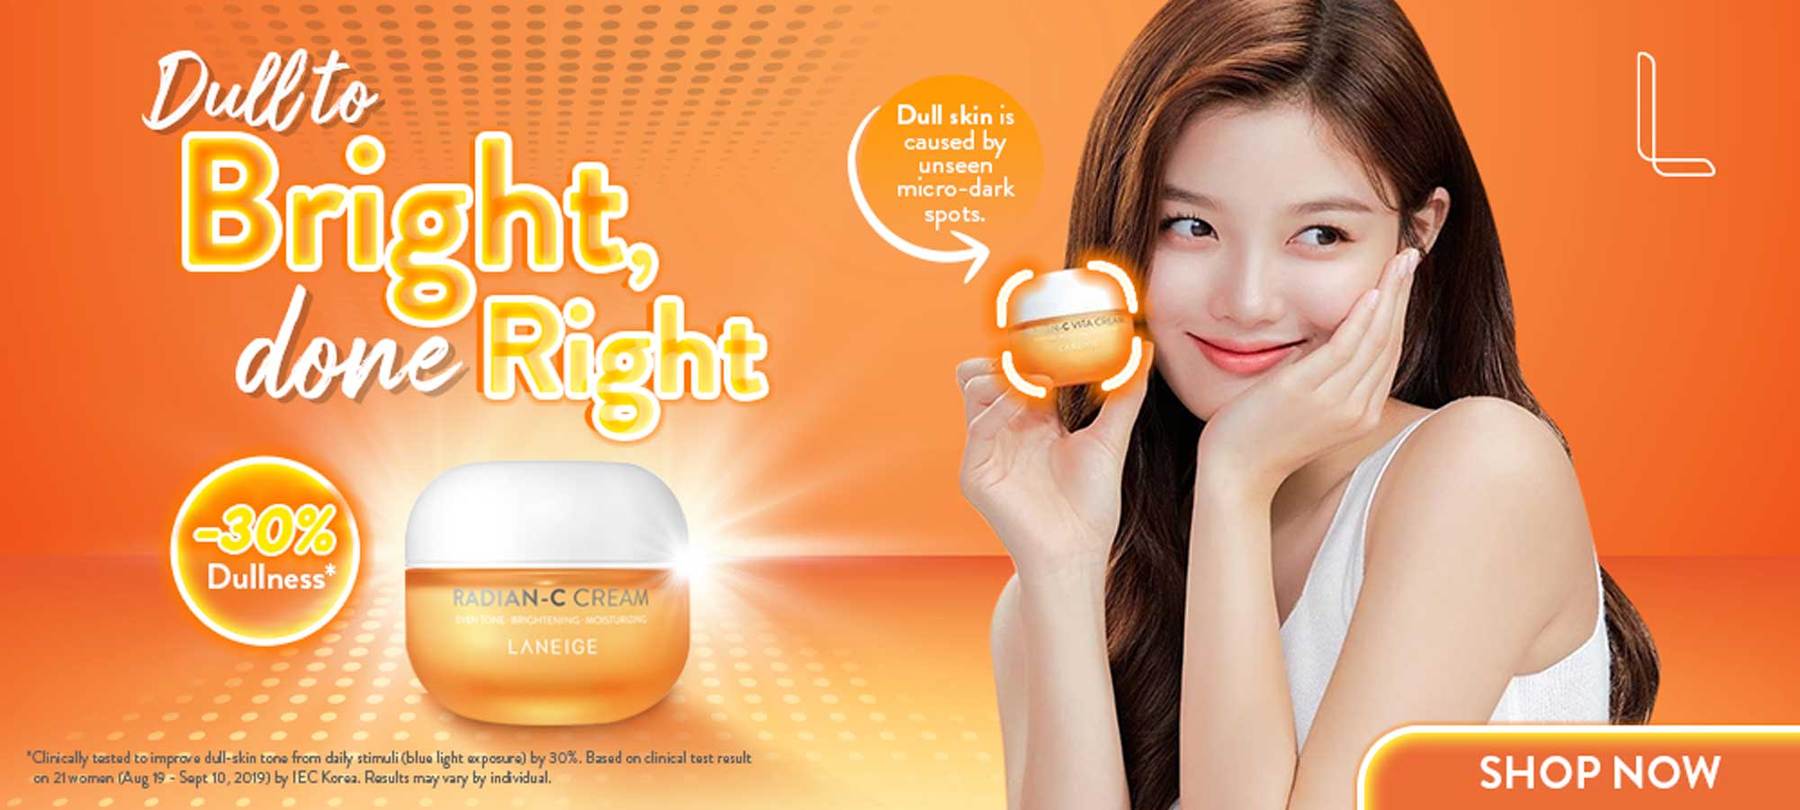 LANEIGE advertisement to promote bright skin